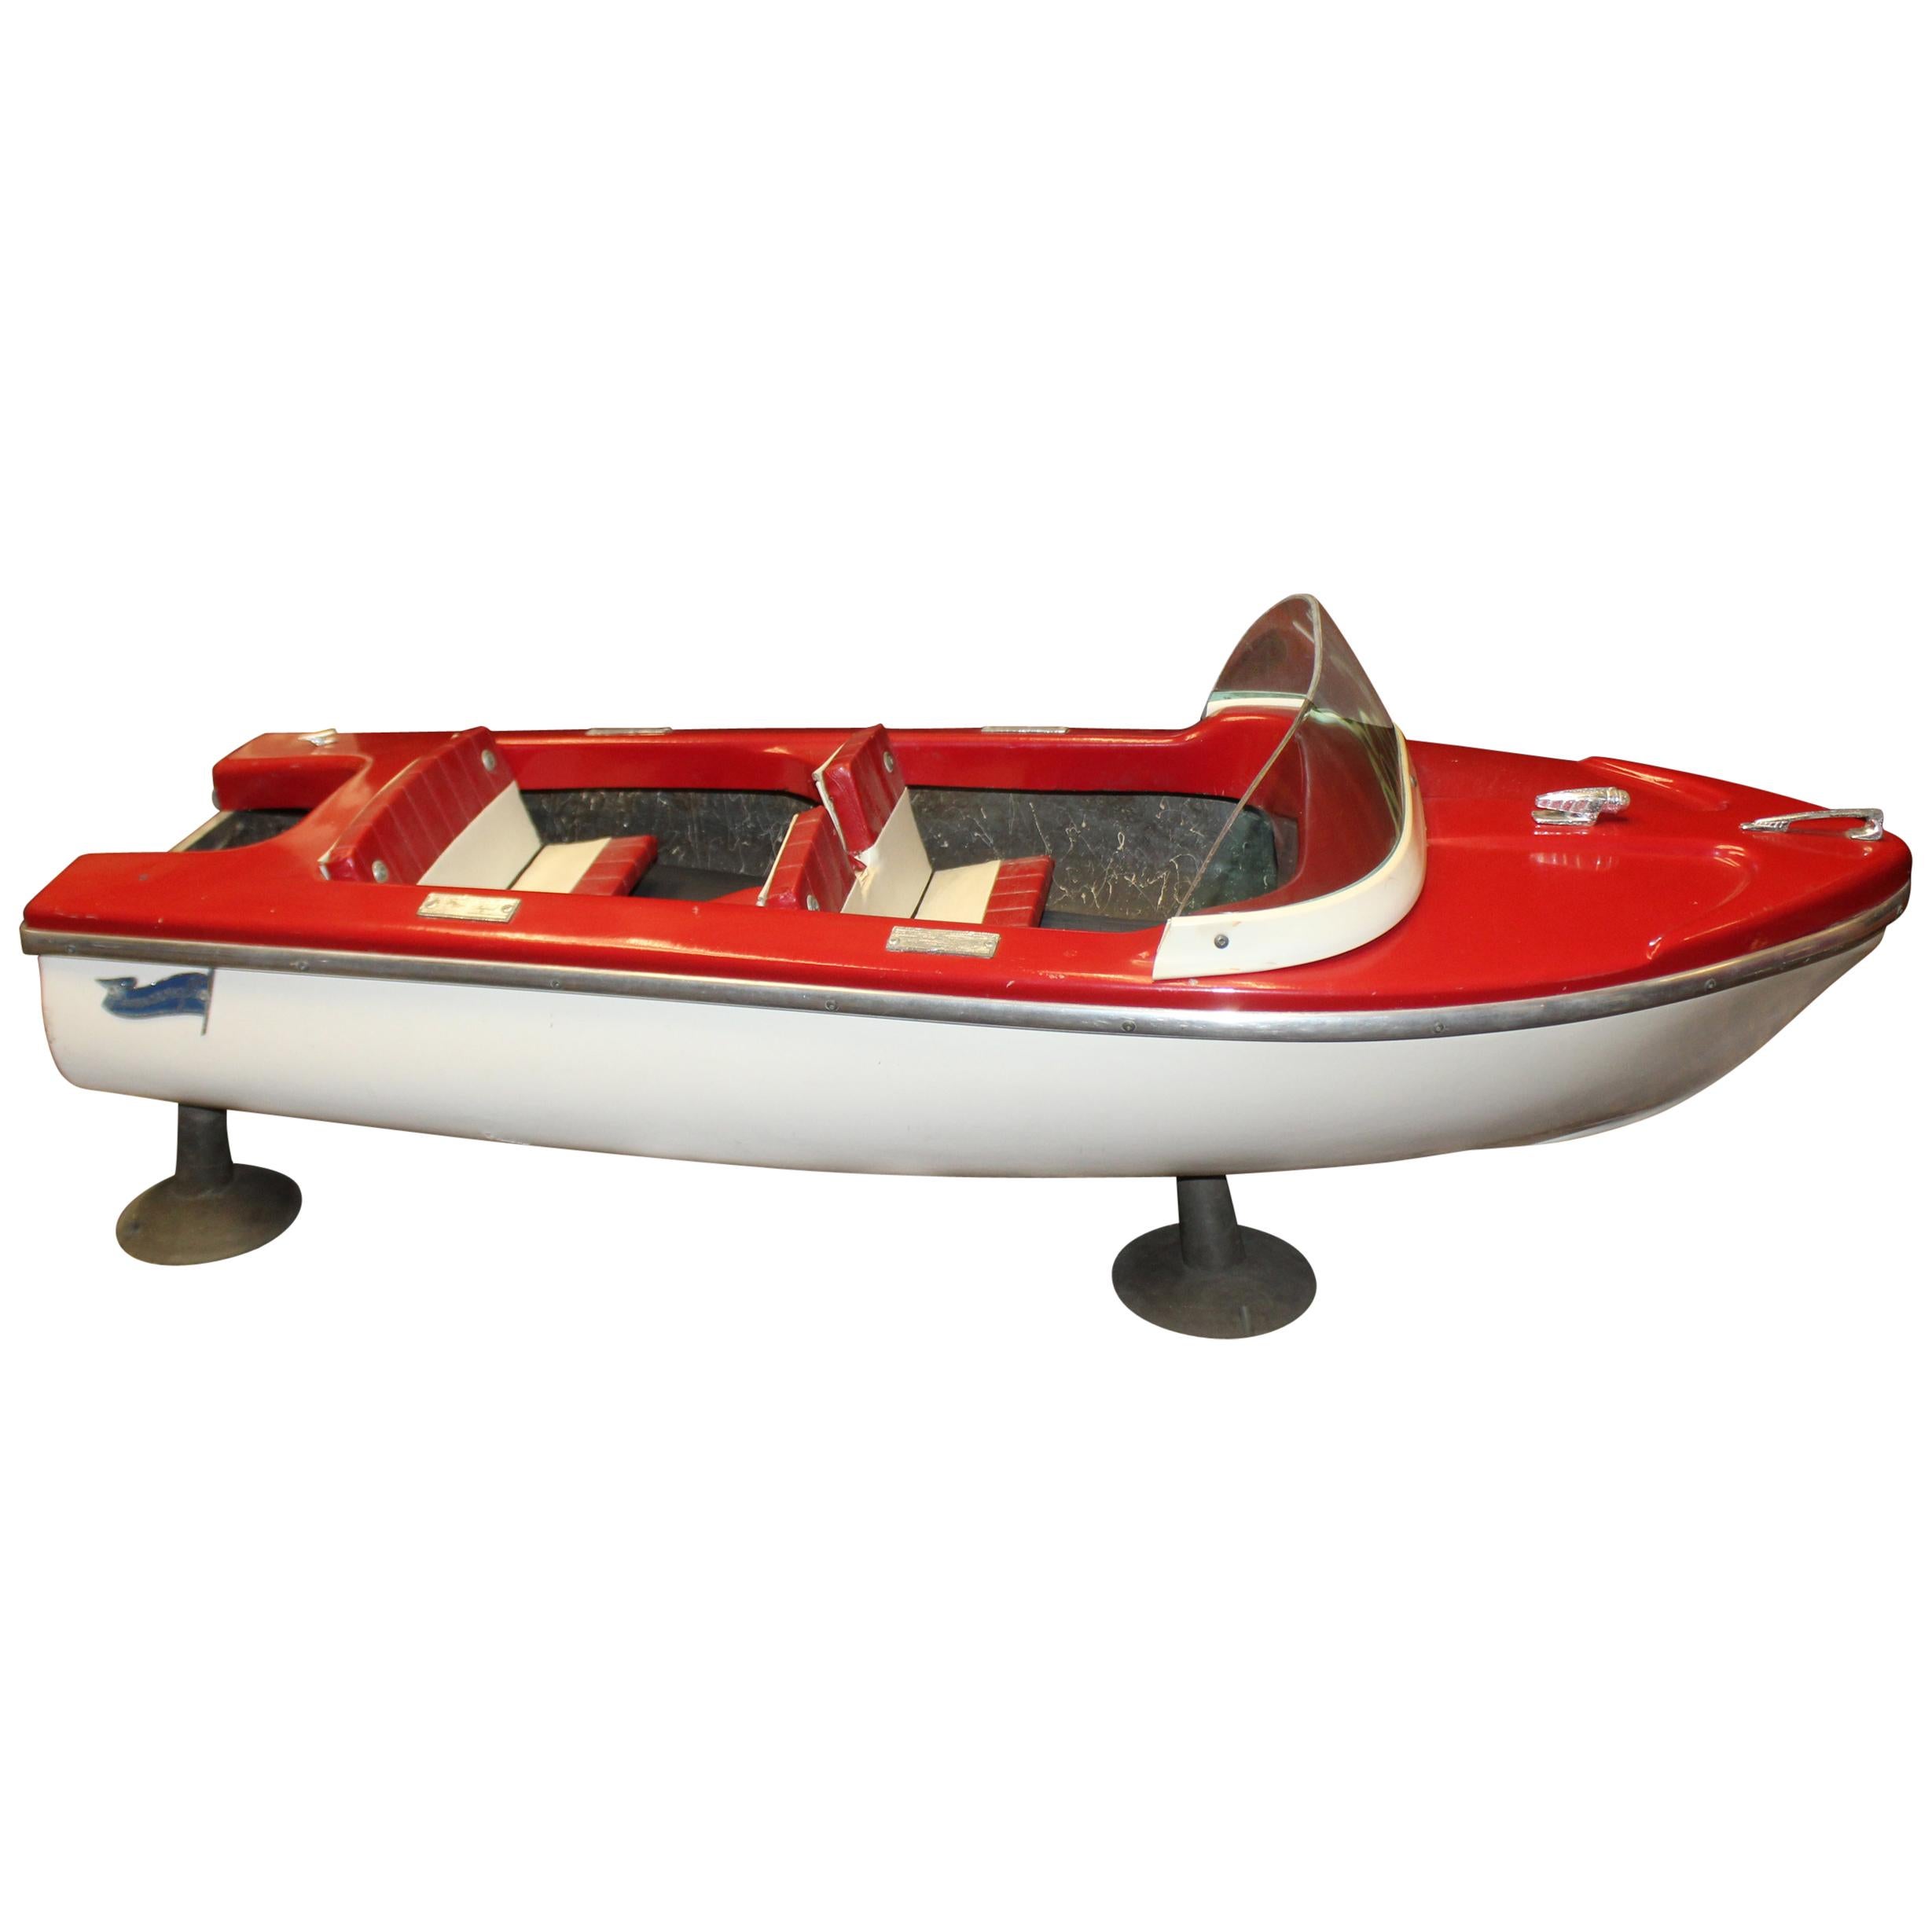 1950s Princecraft Boat Store Display For Sale